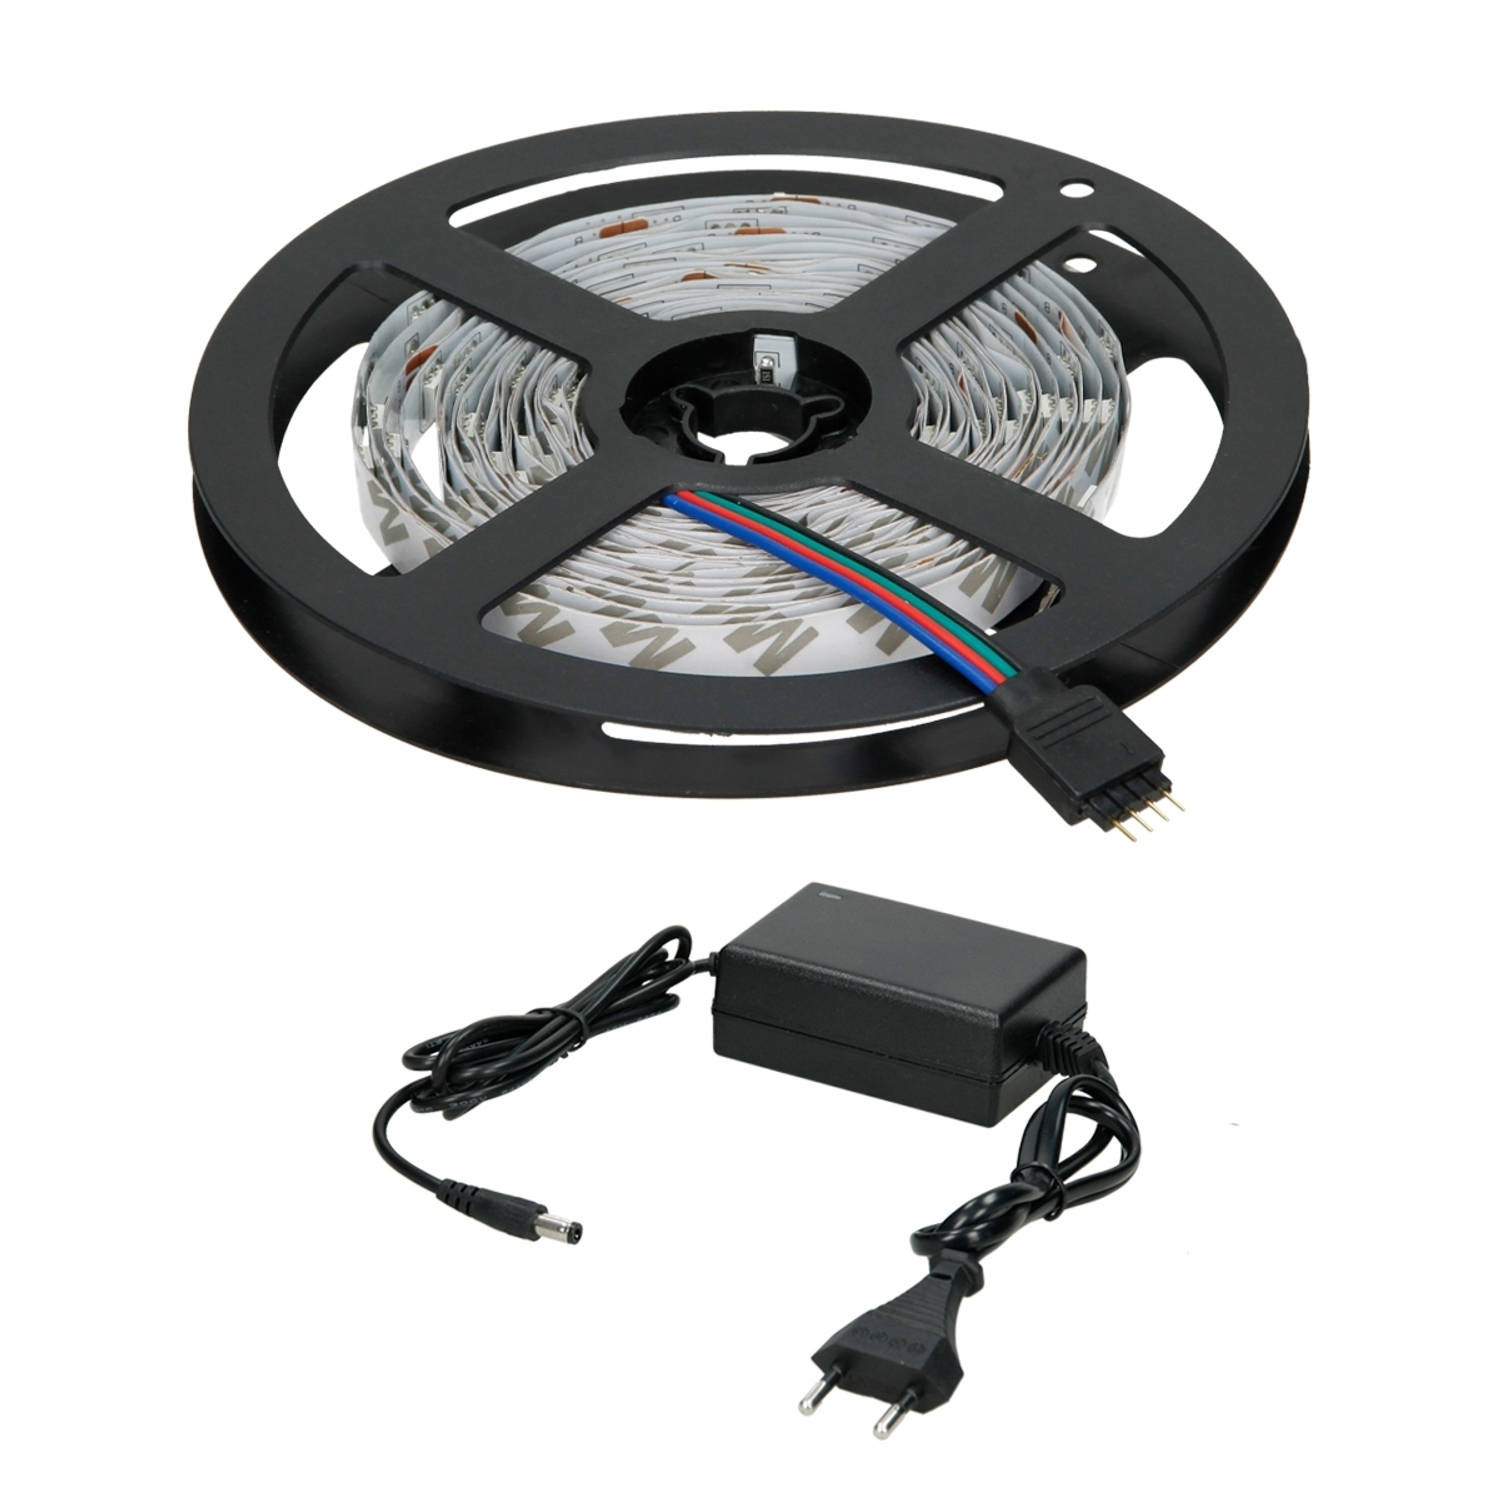 LED-band 4m met voeding 2A SMD 3528 Koud wit 60 LED/m Waterdicht